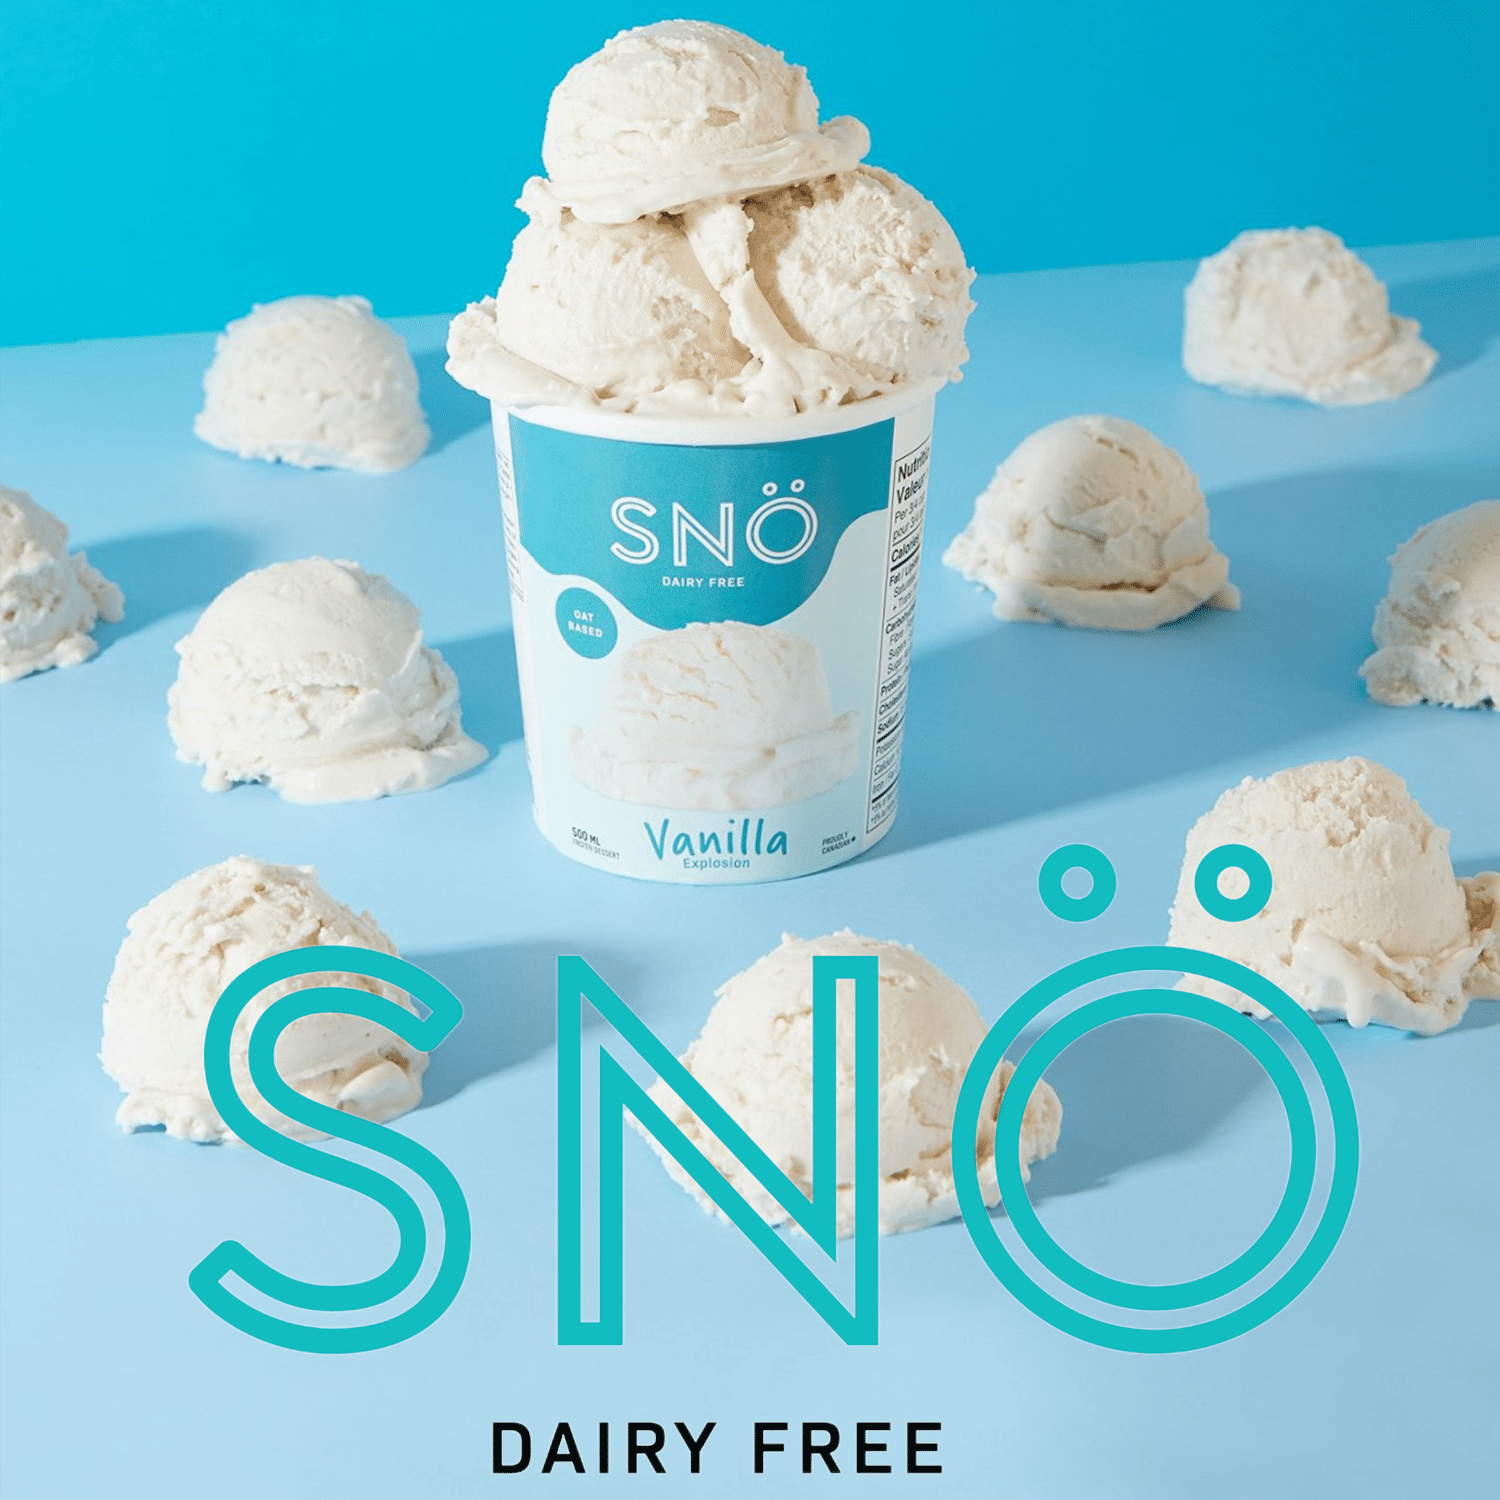 sno dairy free ice cream from wholesale distributor transcold distribution